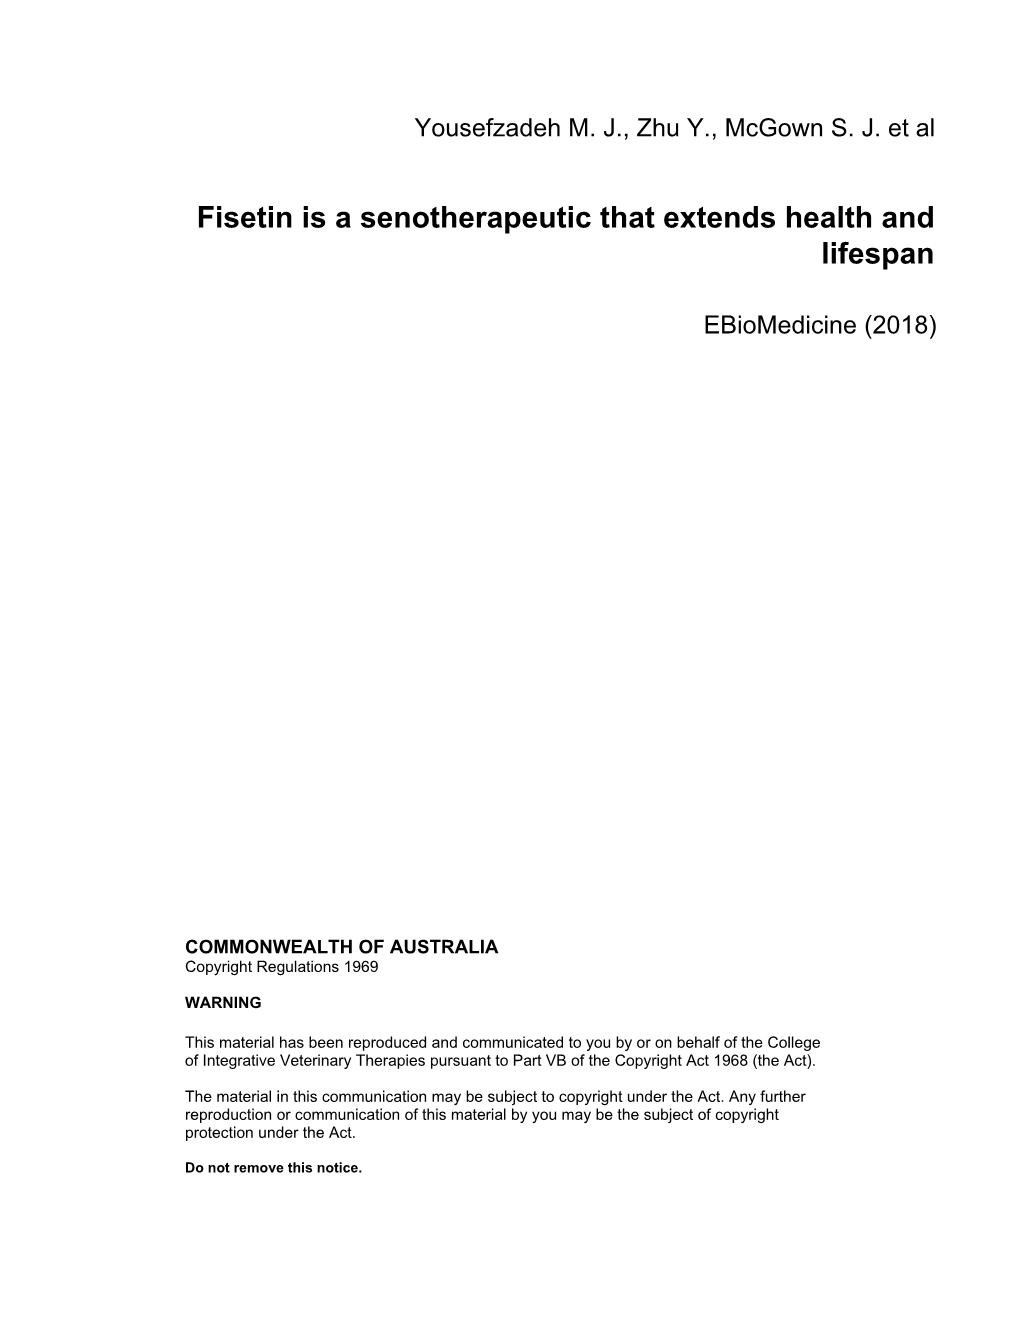 Fisetin Is a Senotherapeutic That Extends Health and Lifespan